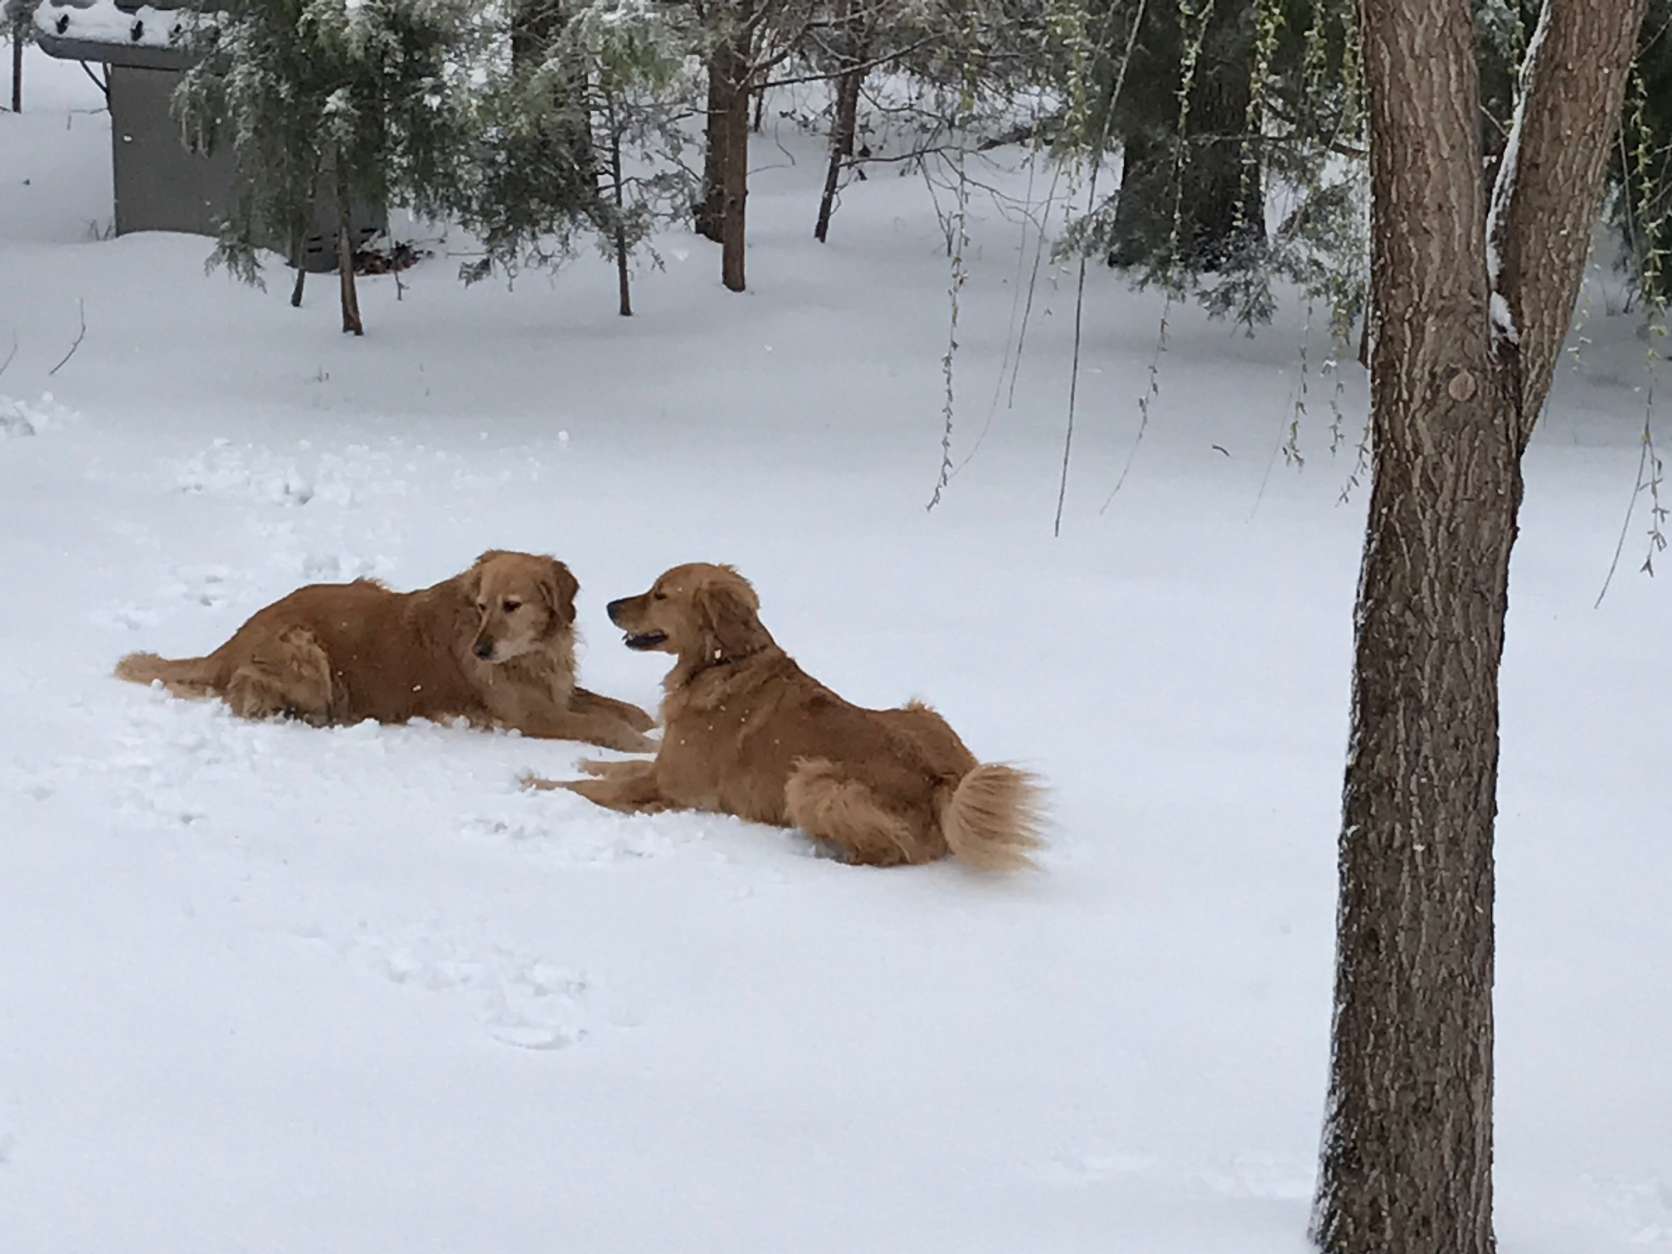 The best kind of blanket? A blanket of snow! (WTOP/Mike Moss)